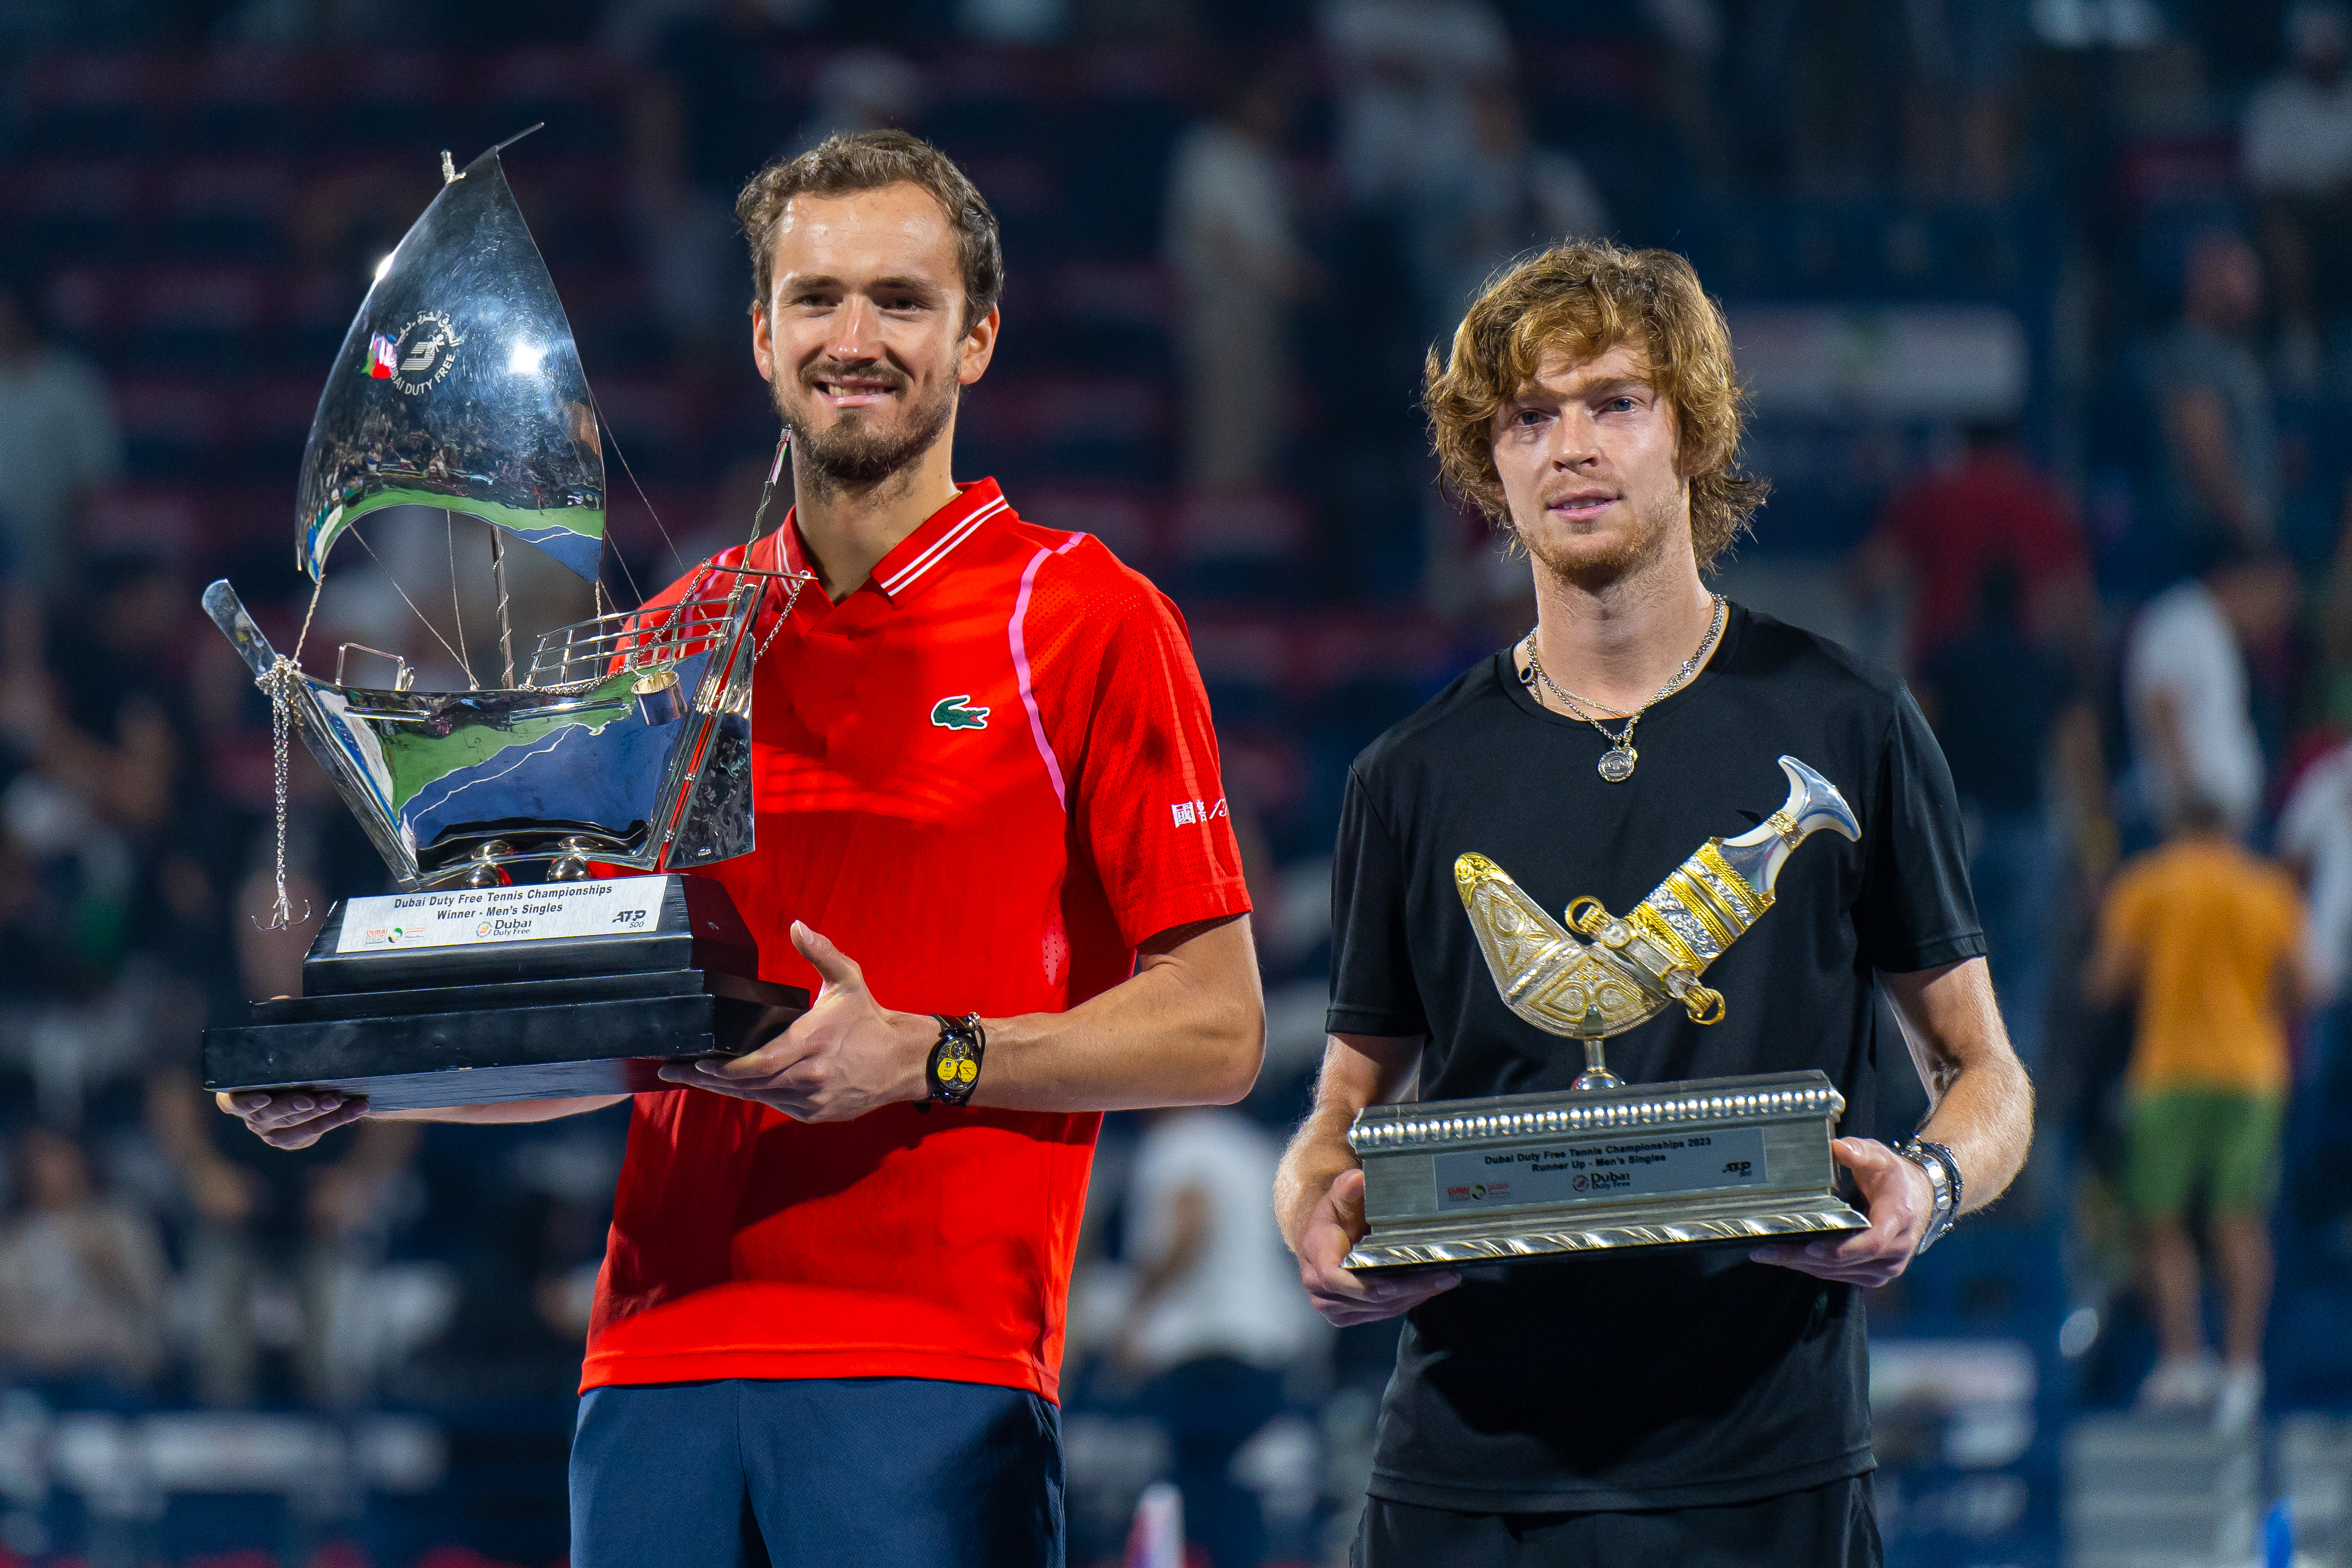 Daniil Medvedev (L) poses with the trophy alongside Andrey Rublev (R) after the finals of the Dubai Duty Free tennis tournament at Dubai Tennis stadium.